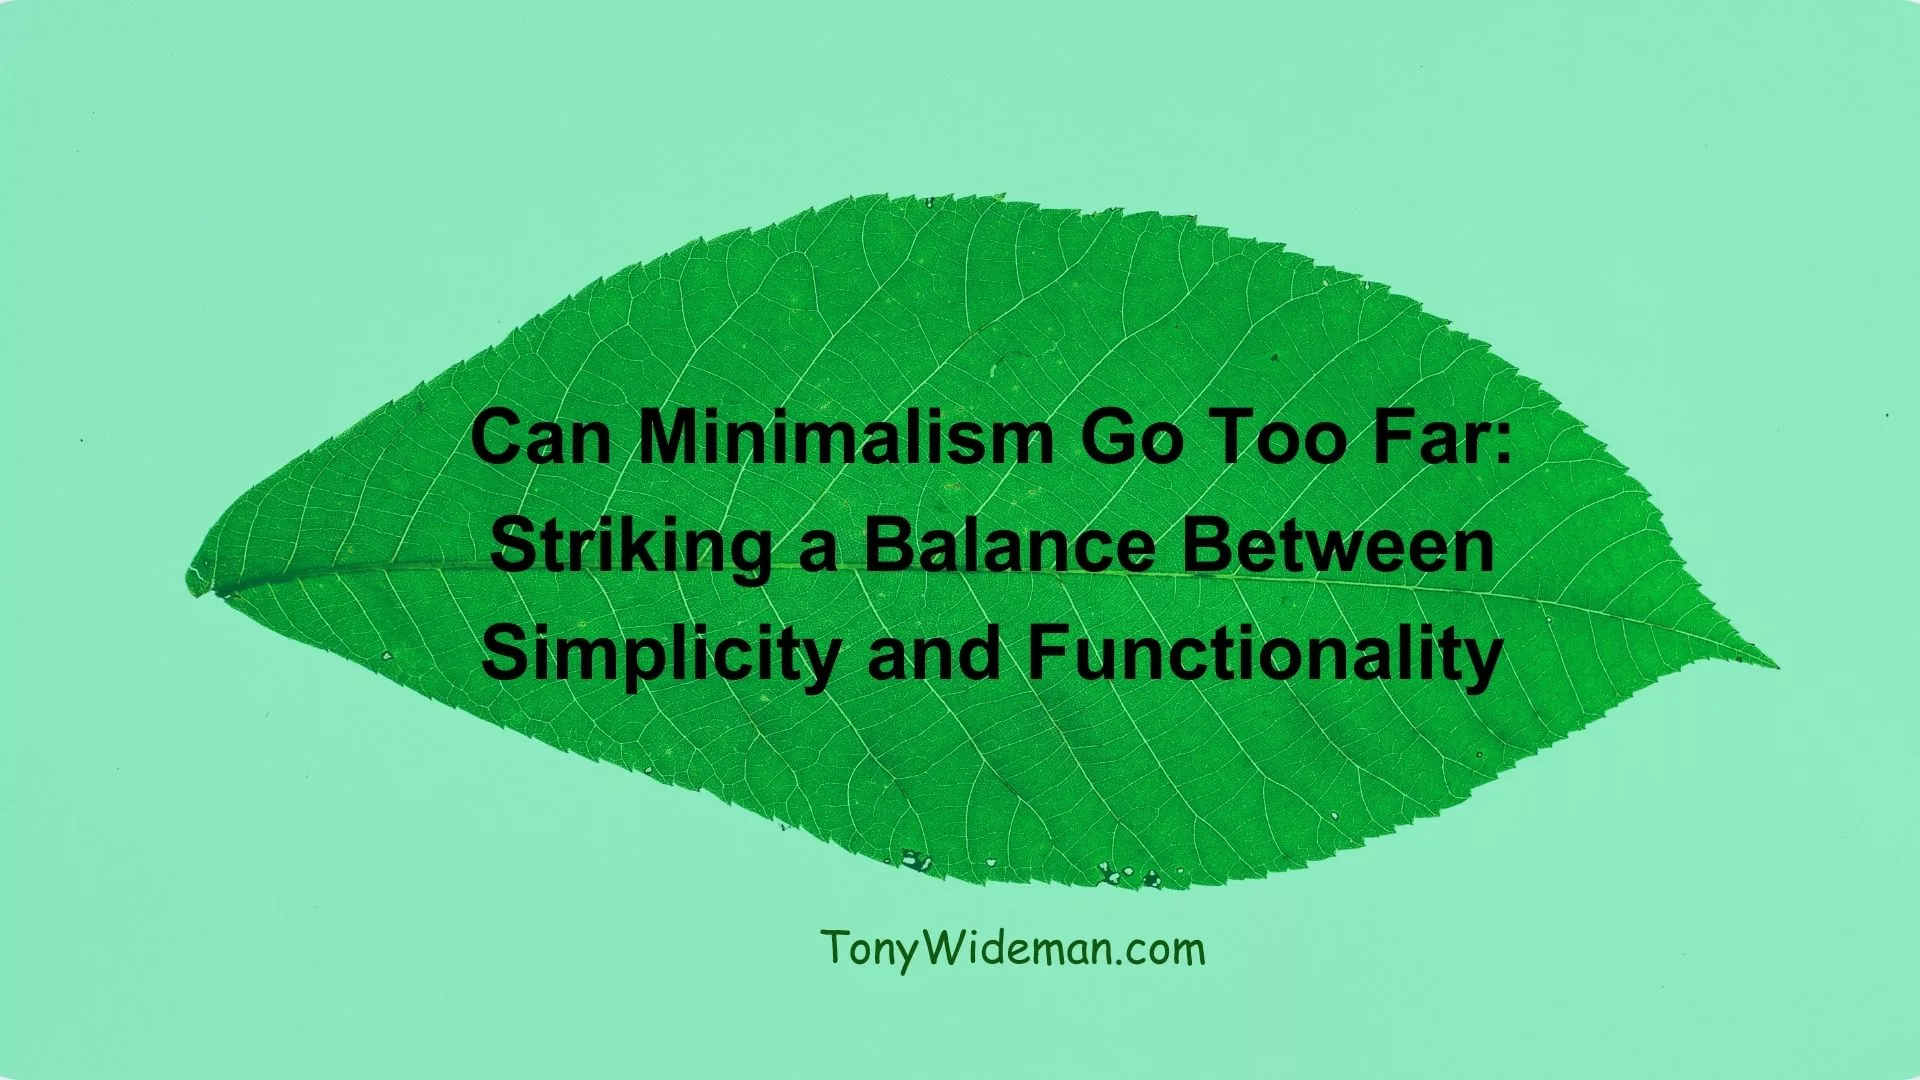 Can Minimalism Go Too Far: Striking a Balance Between Simplicity and Functionality